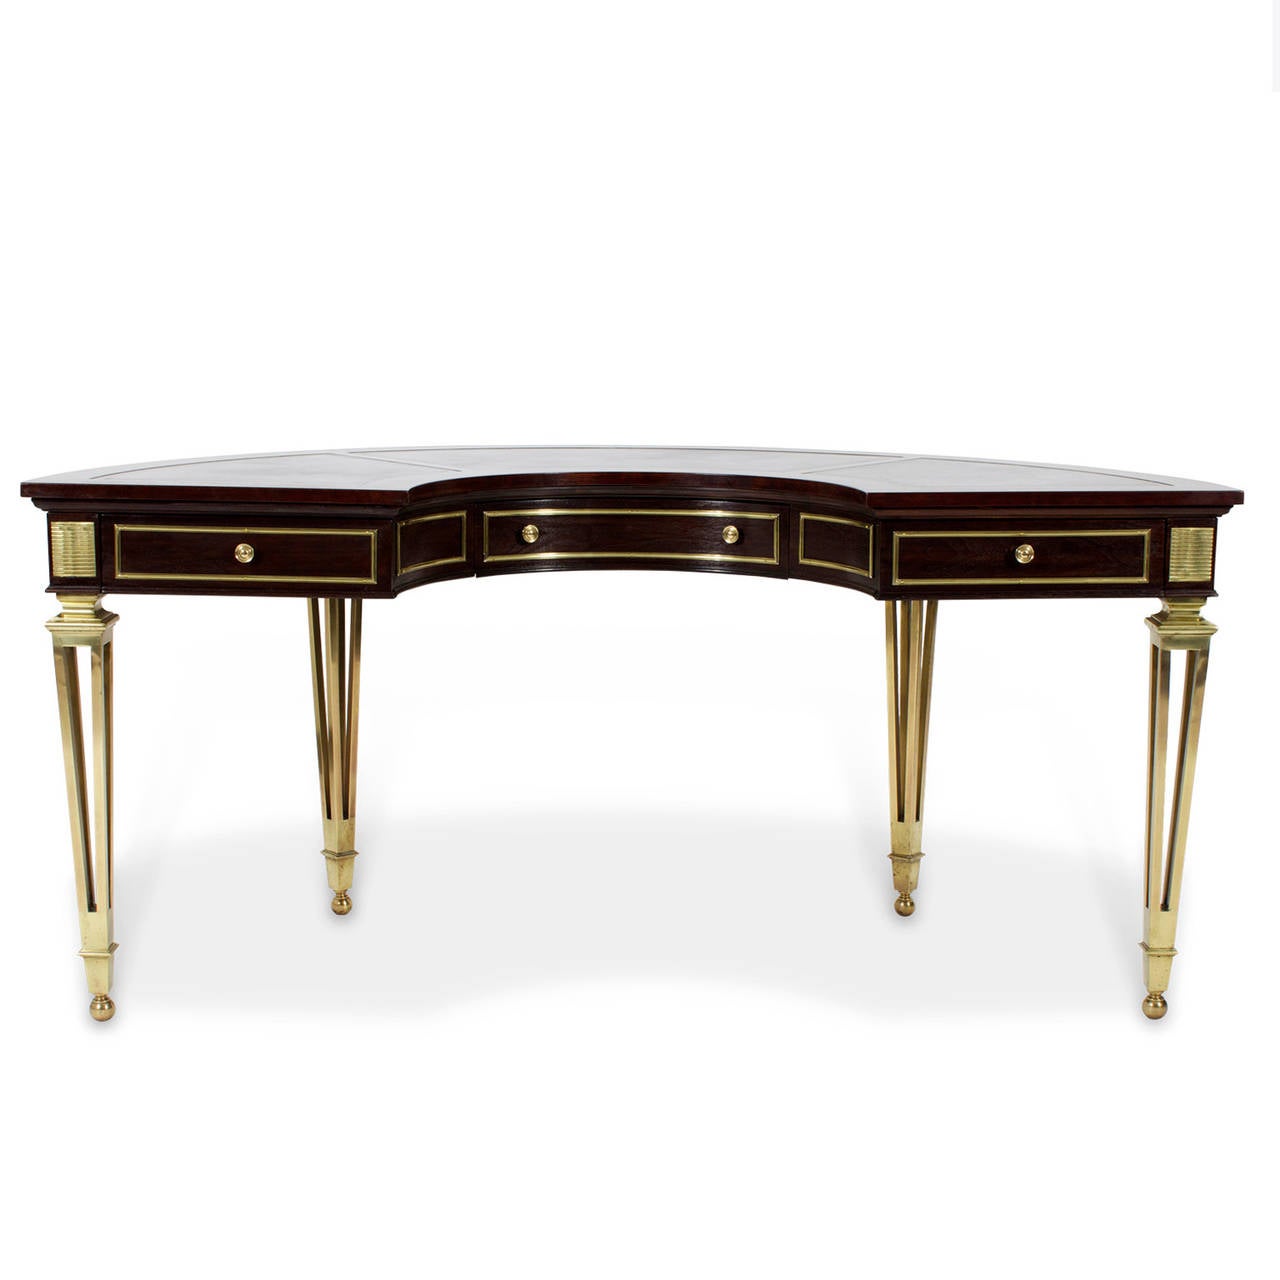 A labelled mastercraft burl wood demilune desk featuring a brass trimmed concave centre drawer flanked by brass trimmed panels and two drawers. Four bronze tapered legs with ball feet, topped with reeded brass panels. The reverse with three brass